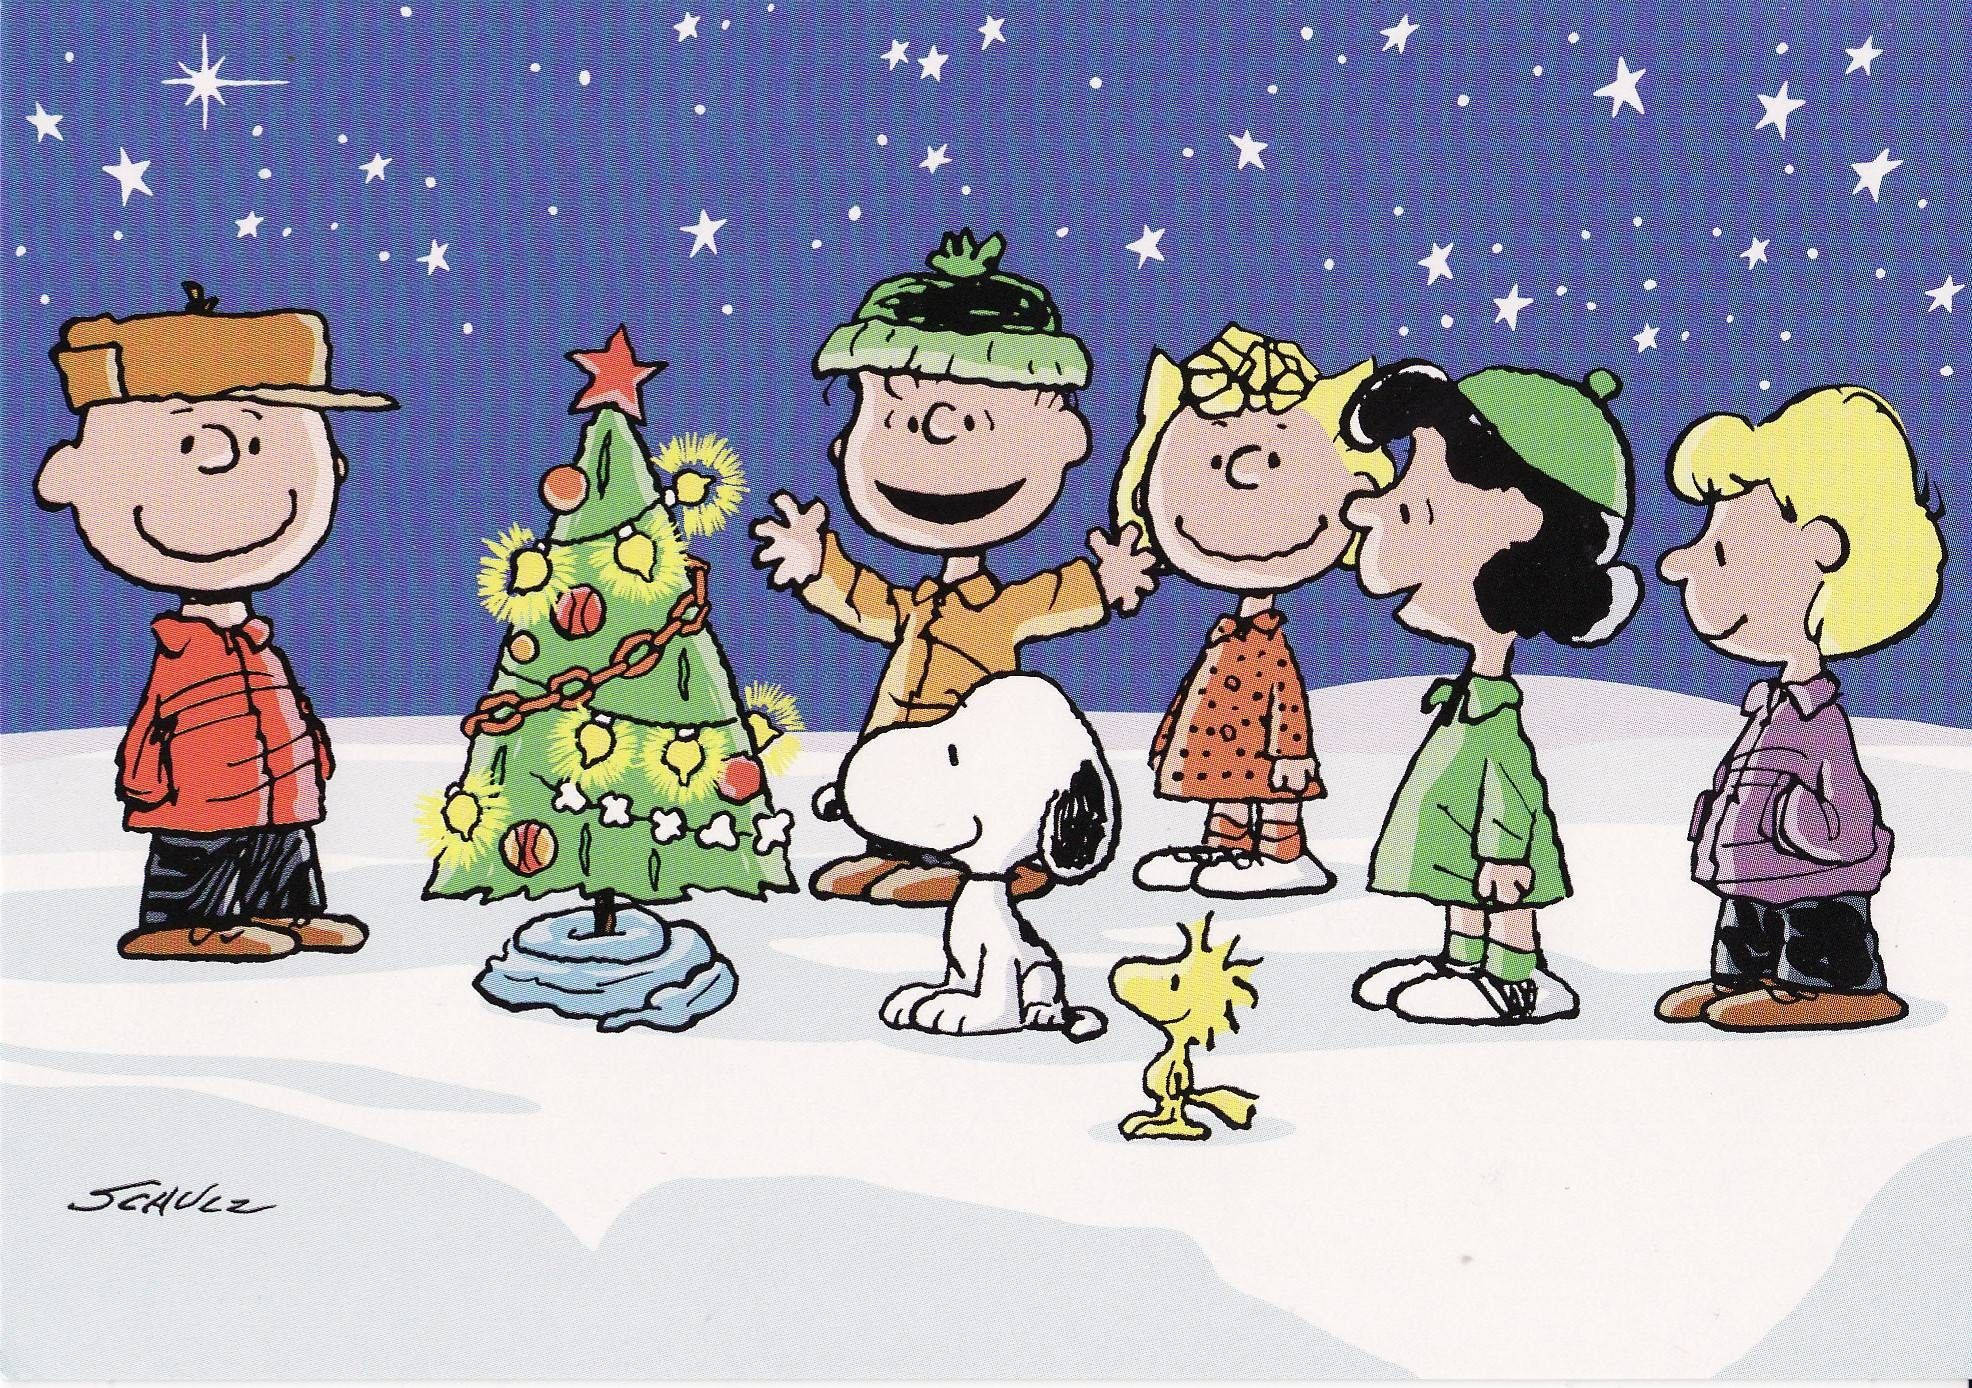 Charlie Brown Christmas Background